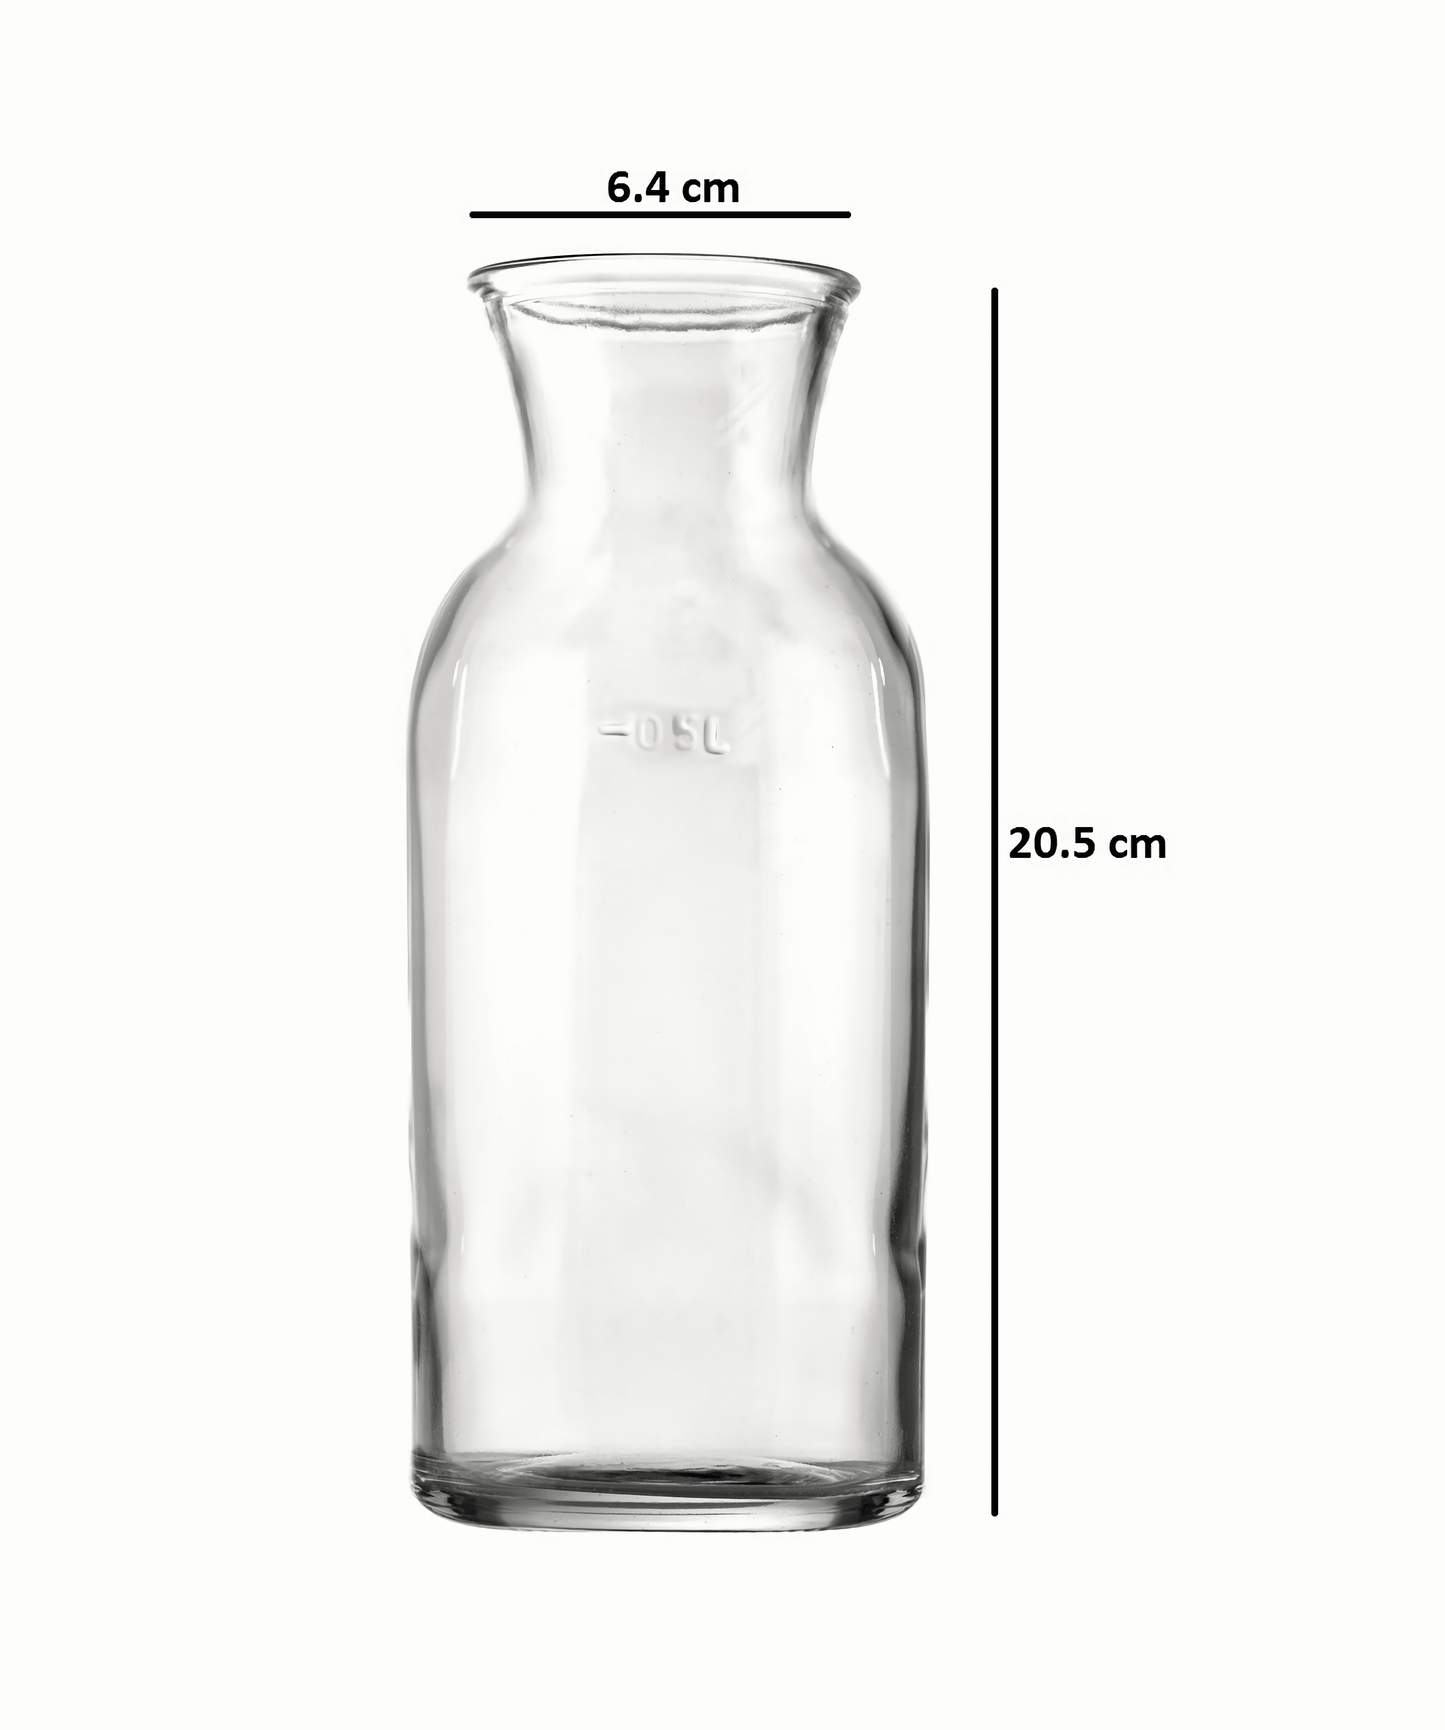 Dimensions of an Elegant Beverage Container - Ideal for wine, cocktails, and more.